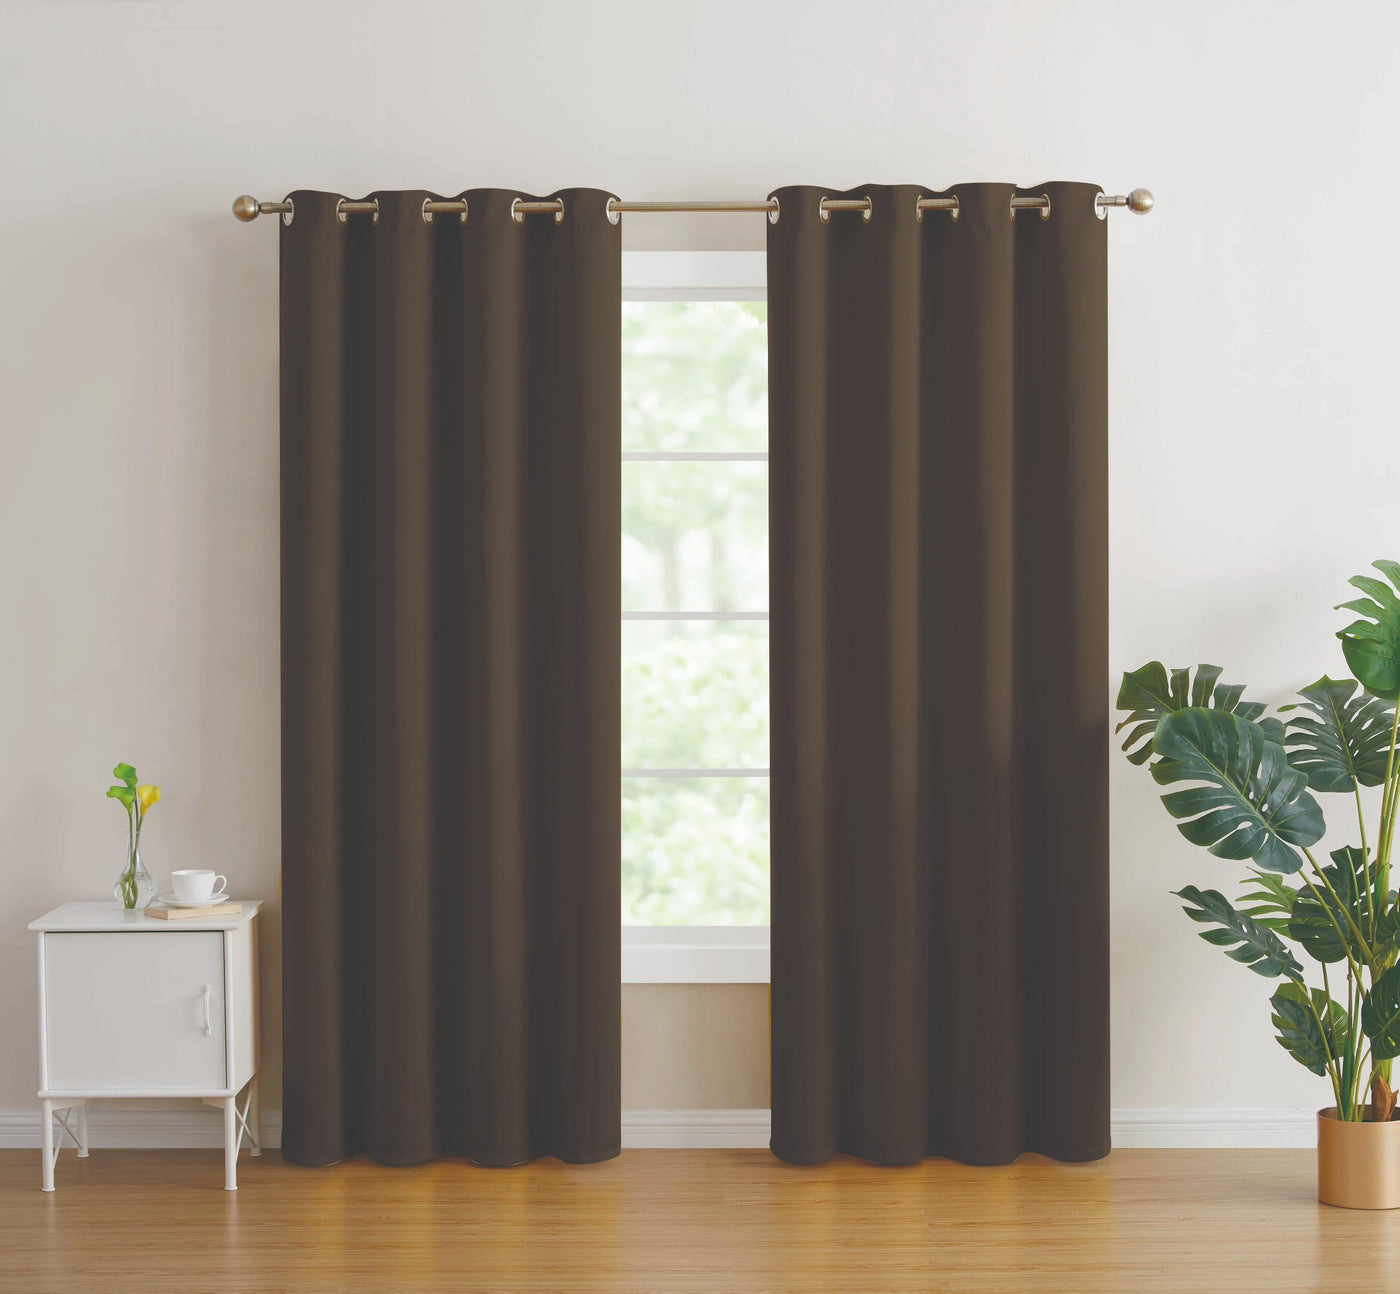 2pc Solid Grommet Thermal Insulated Window Curtain Panels Room Darkening Blackout 95"